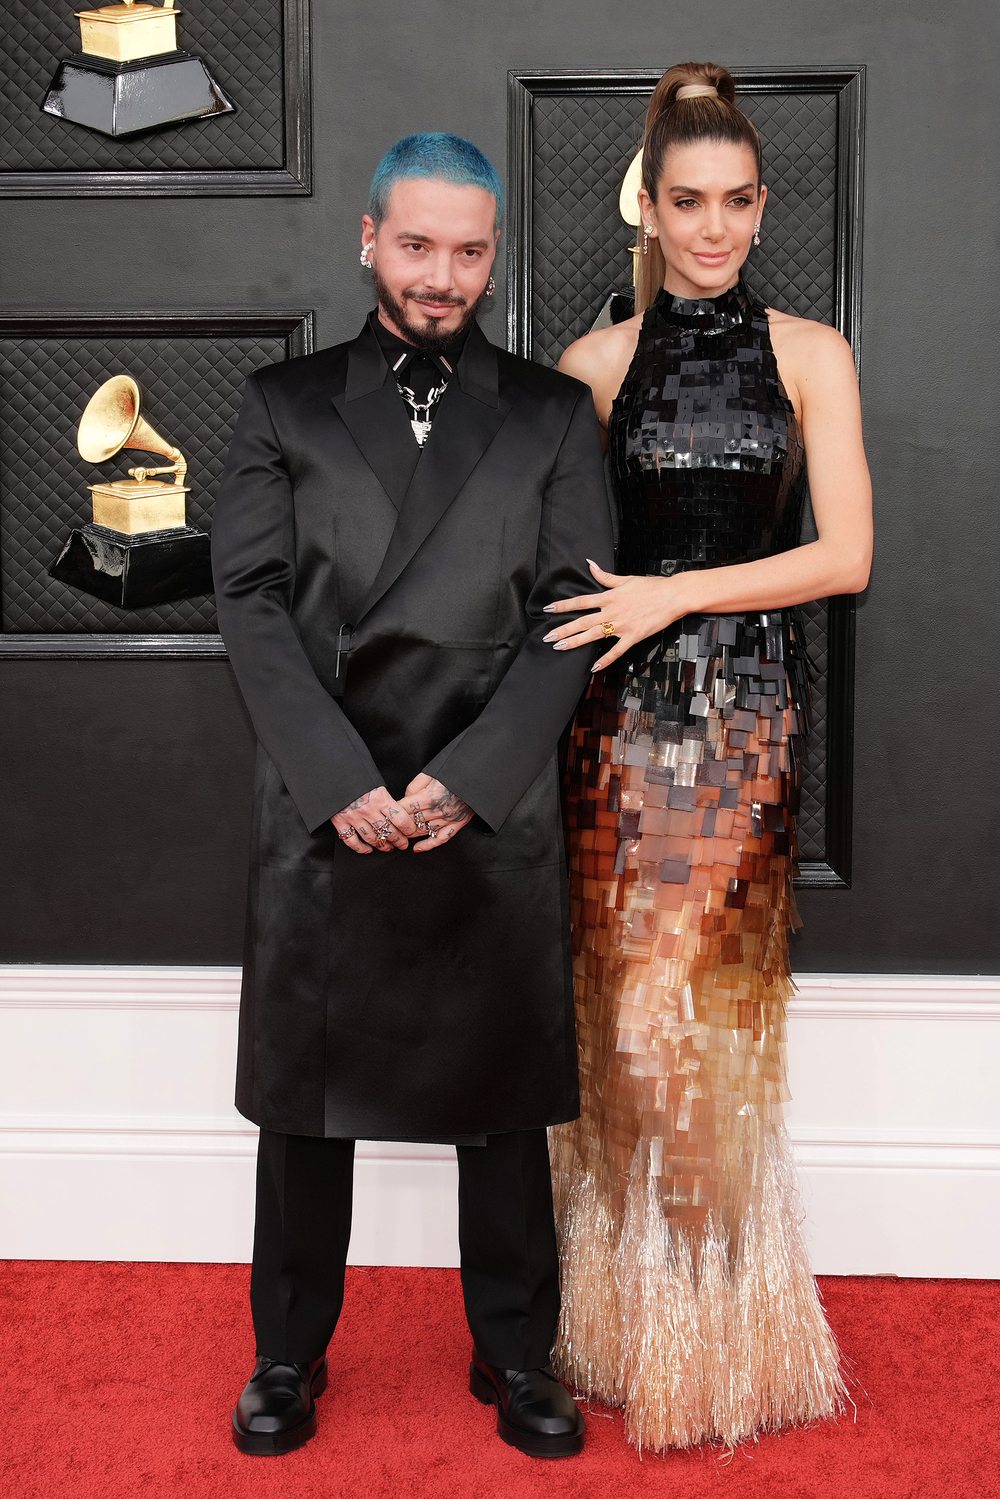 J. Balvin and Valentina Ferrer wearing Givenchy